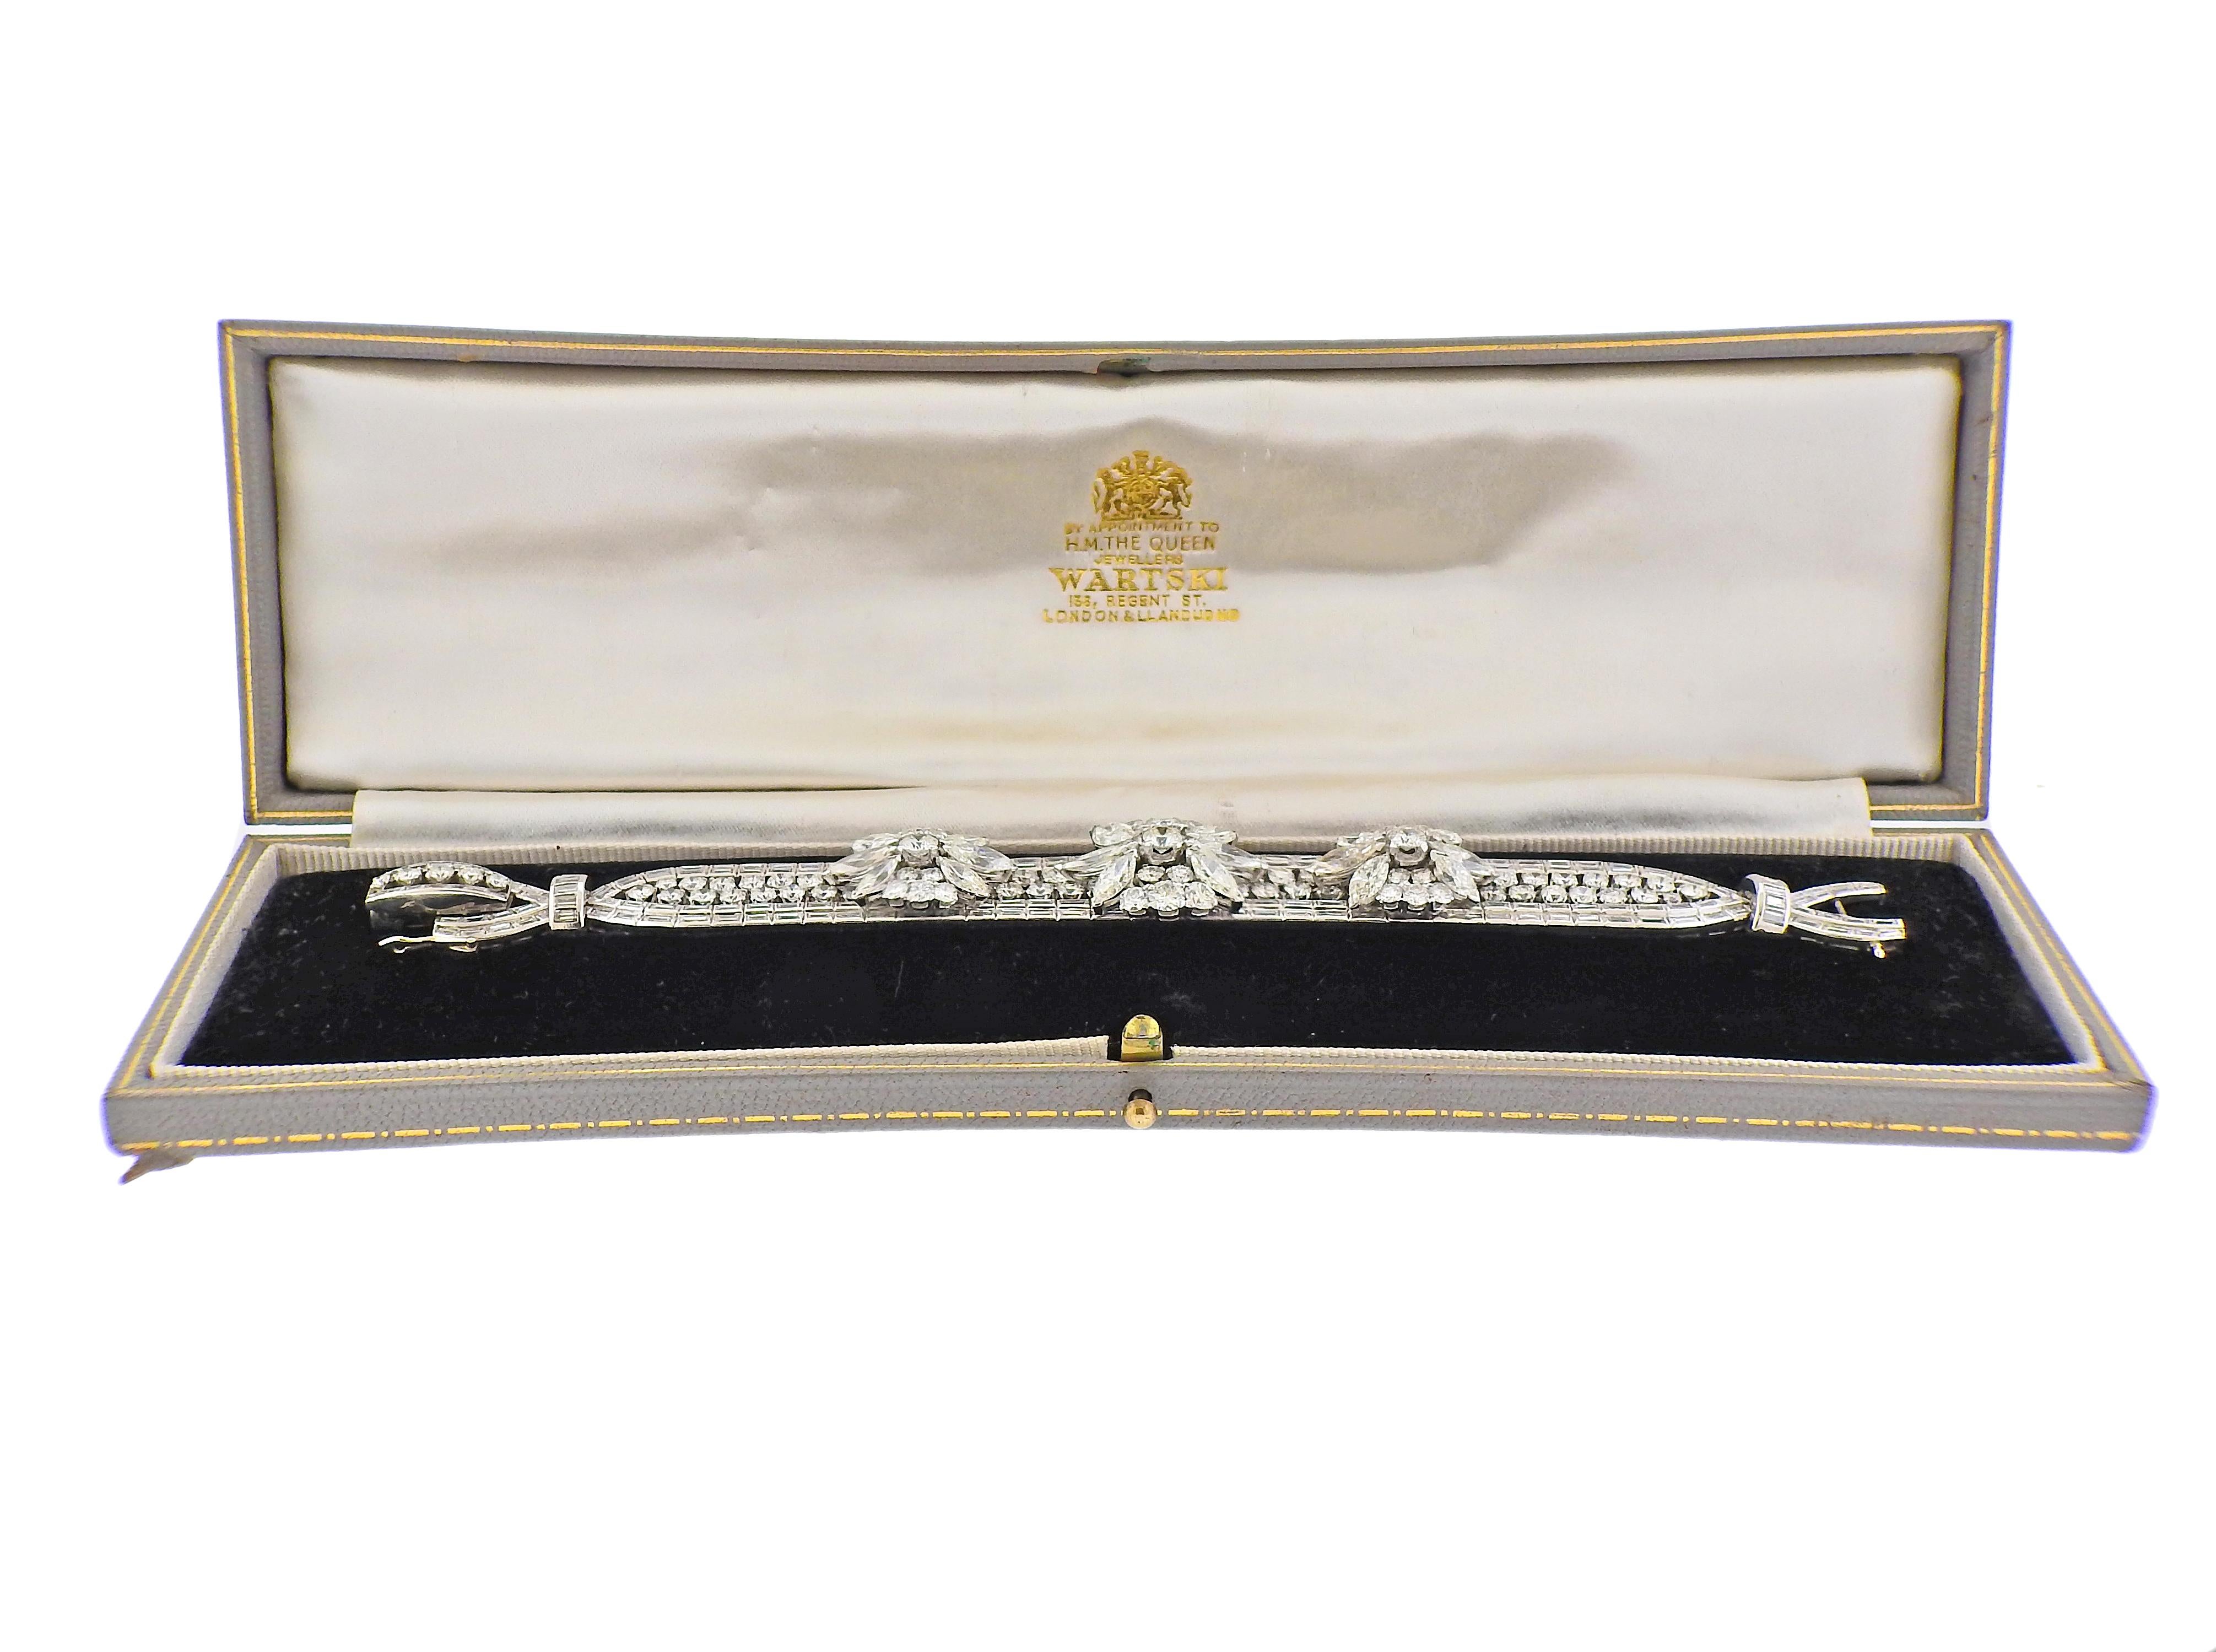 Circa 1930s, Important platinum bracelet, set with a combination of round, baguette and marquise cut diamonds - approximately 25 carats total, all stones range VS1-SI1, GH color. Bracelet id 6.5